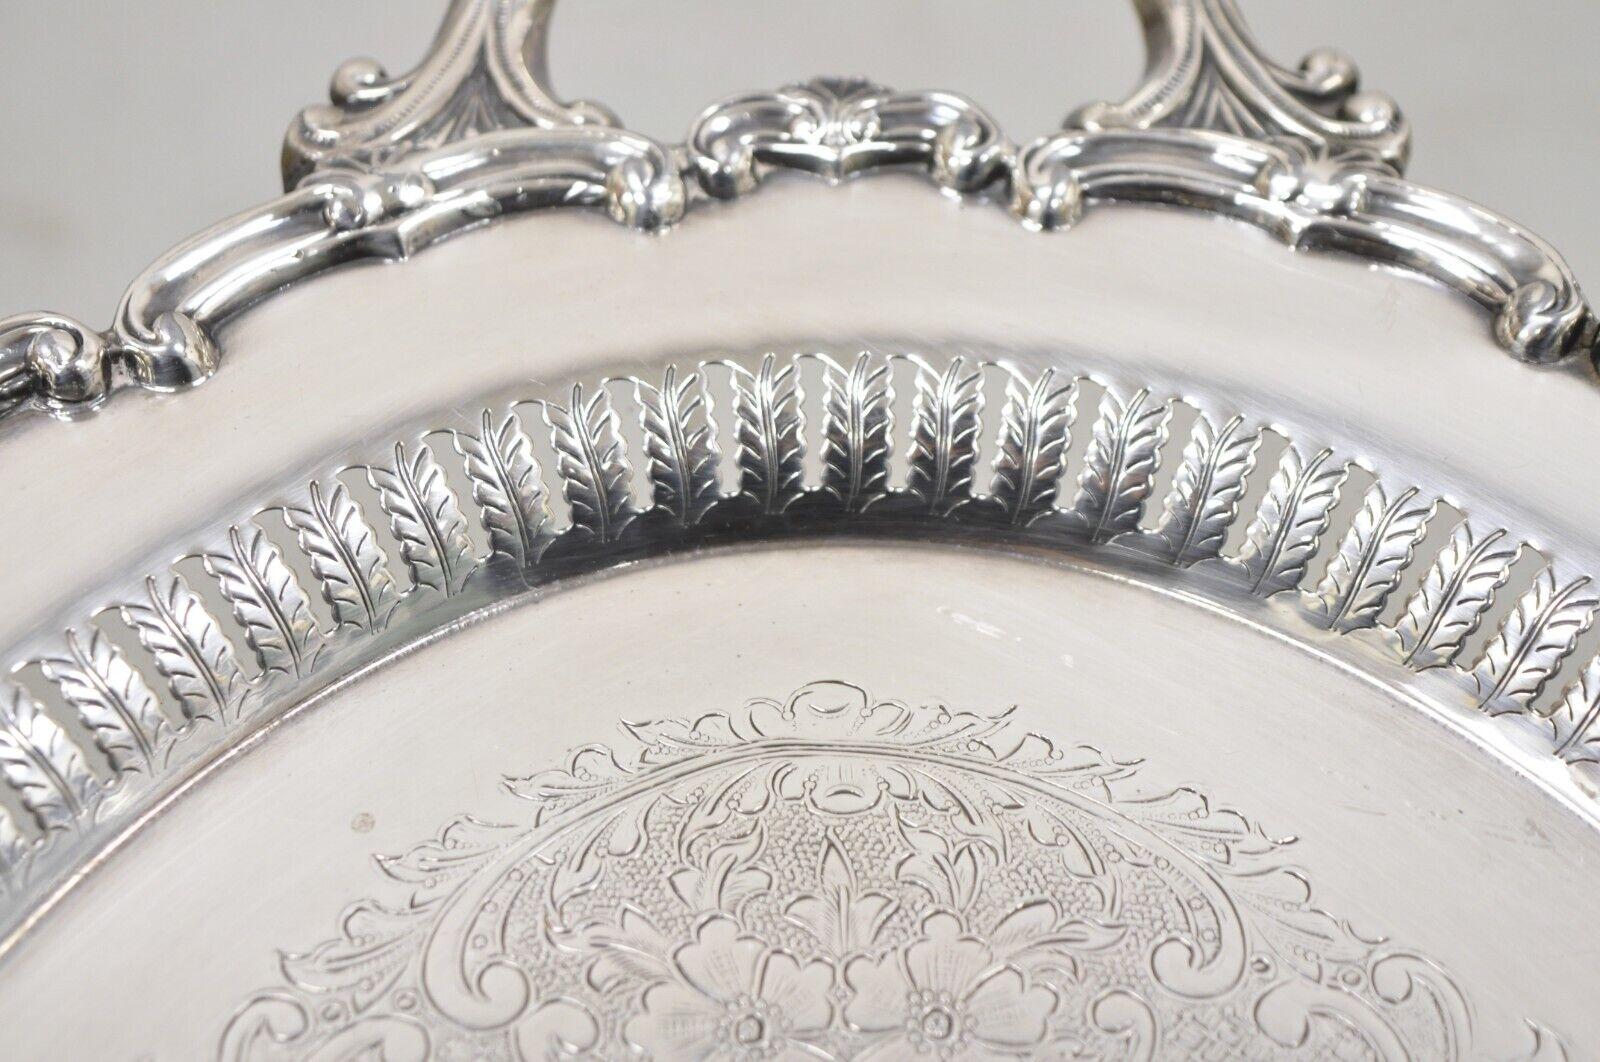 Antique Edwardian Silver Plated Oval Serving Platter Tray w/ Pierced Decoration 7